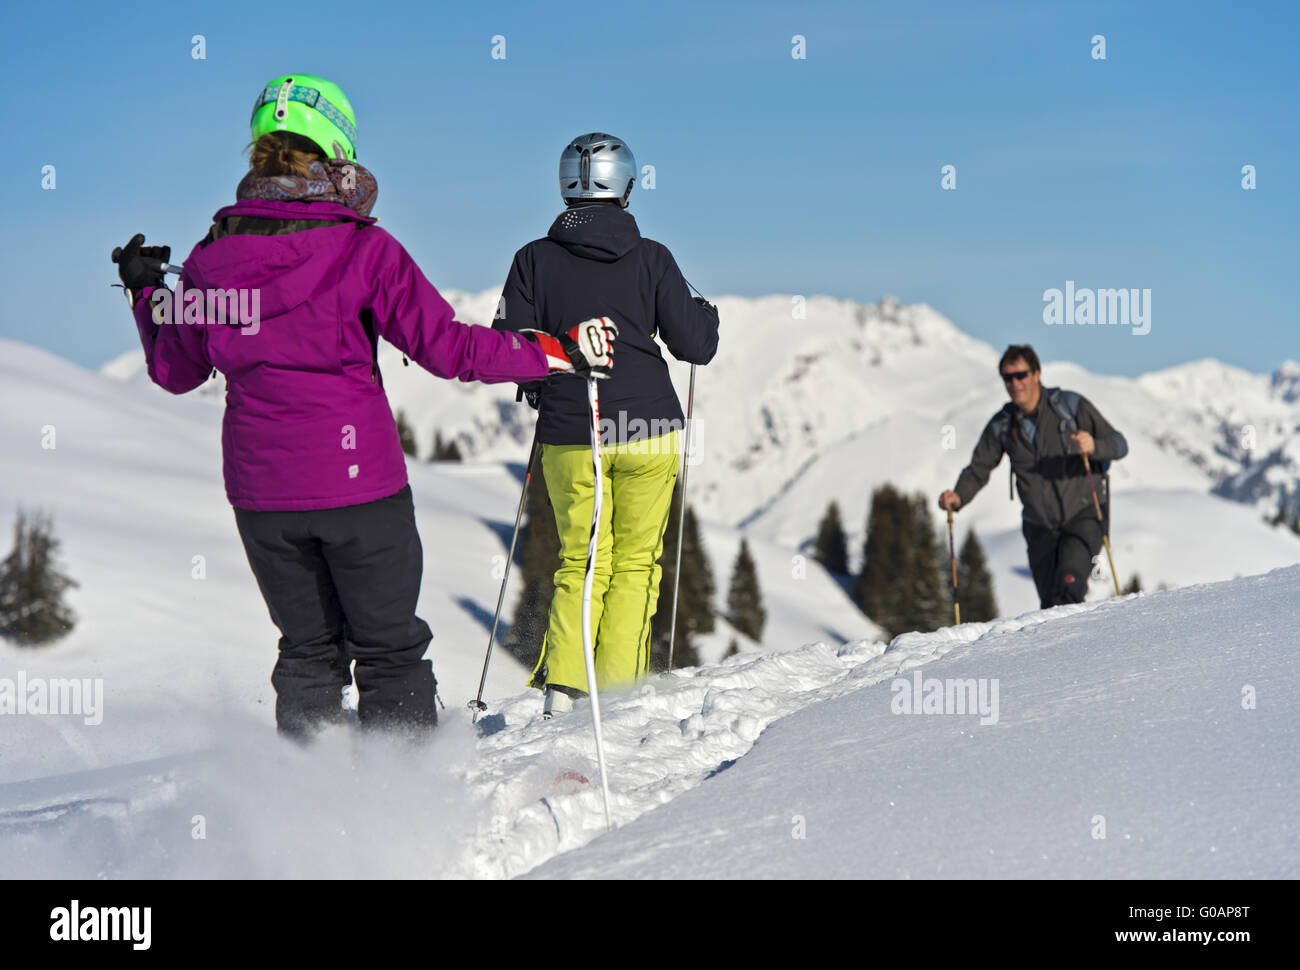 Skiers and ski-hiker in the winterly landscape Stock Photo